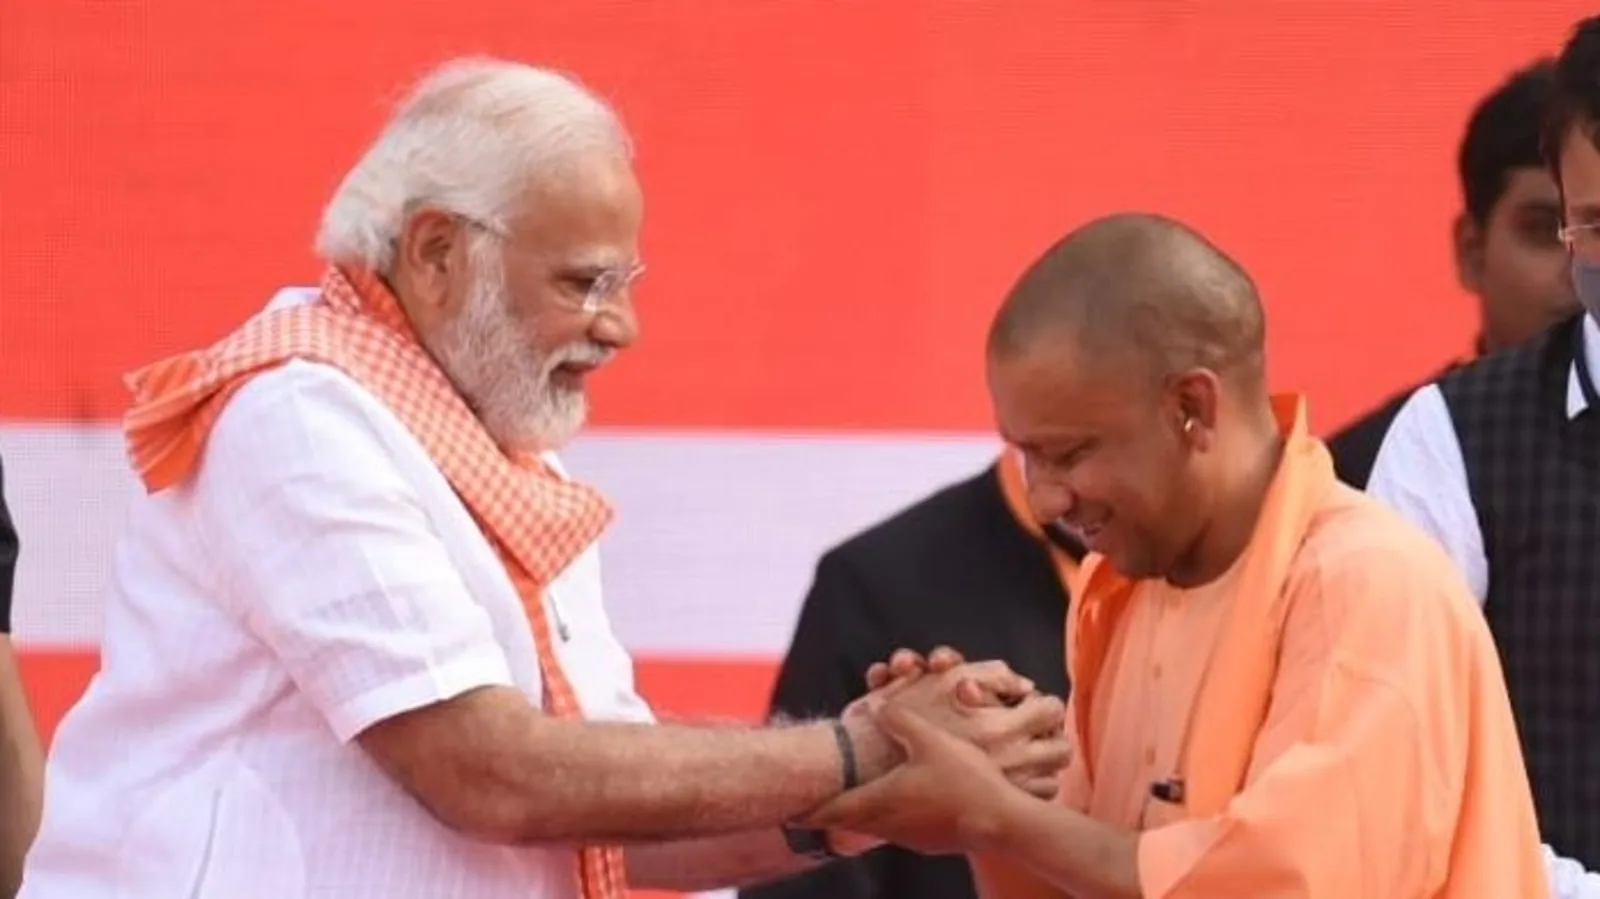 Daily brief: Danish Azad Ansari is the only Muslim face in Yogi Adityanath’s 2.0 govt, and all the latest news